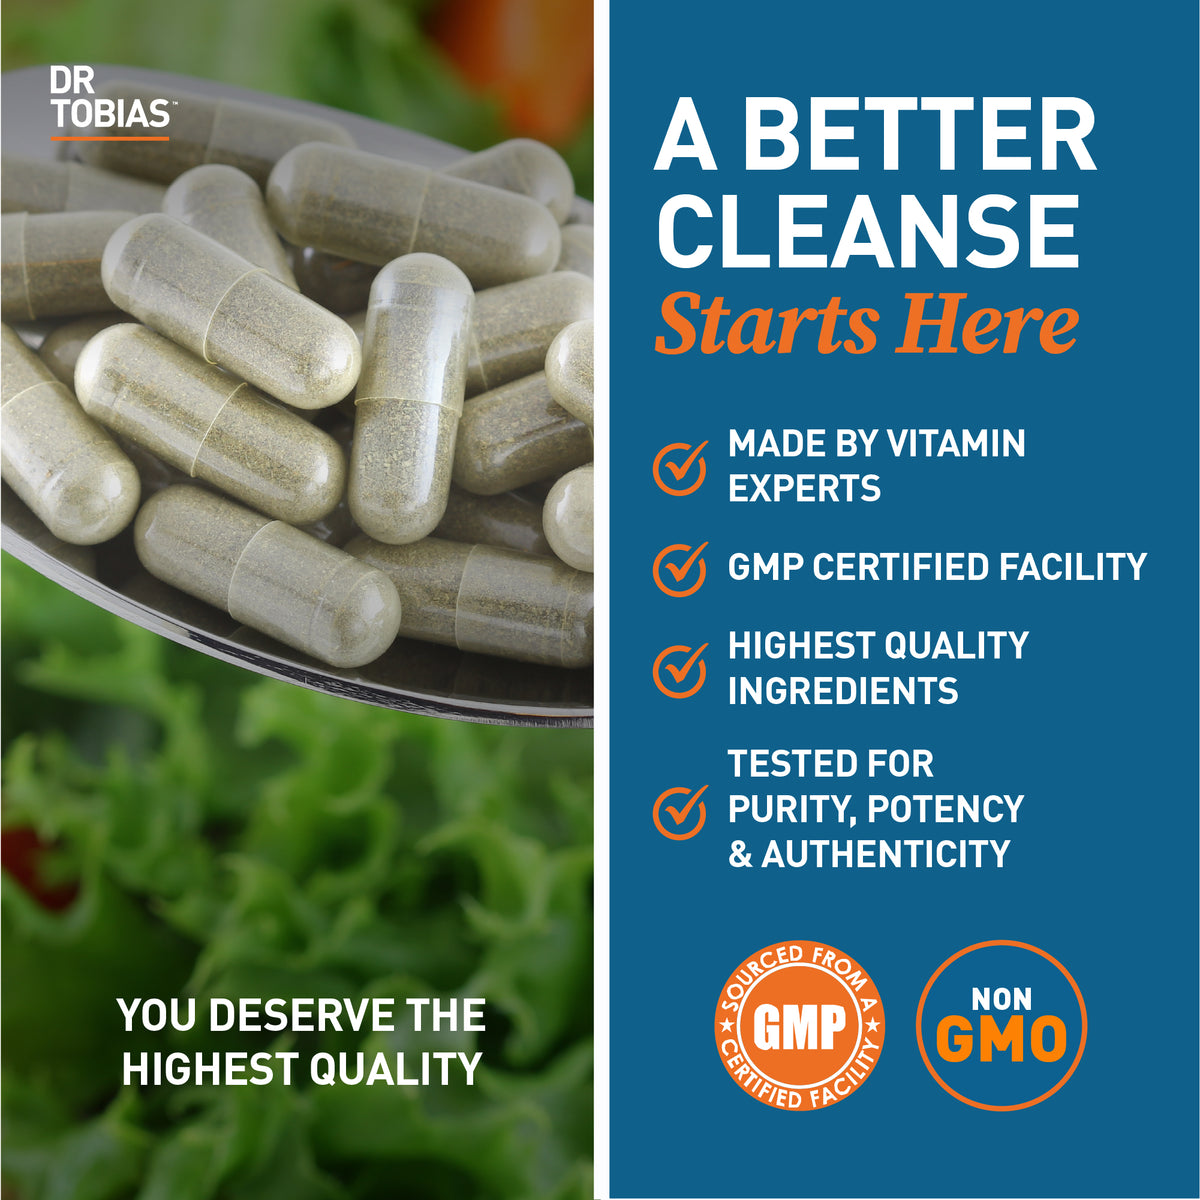 a better cleanse starts here. Made by vitamin experts, gmp certified facility, highest quality ingredients, tested for purity, potency and authenticity